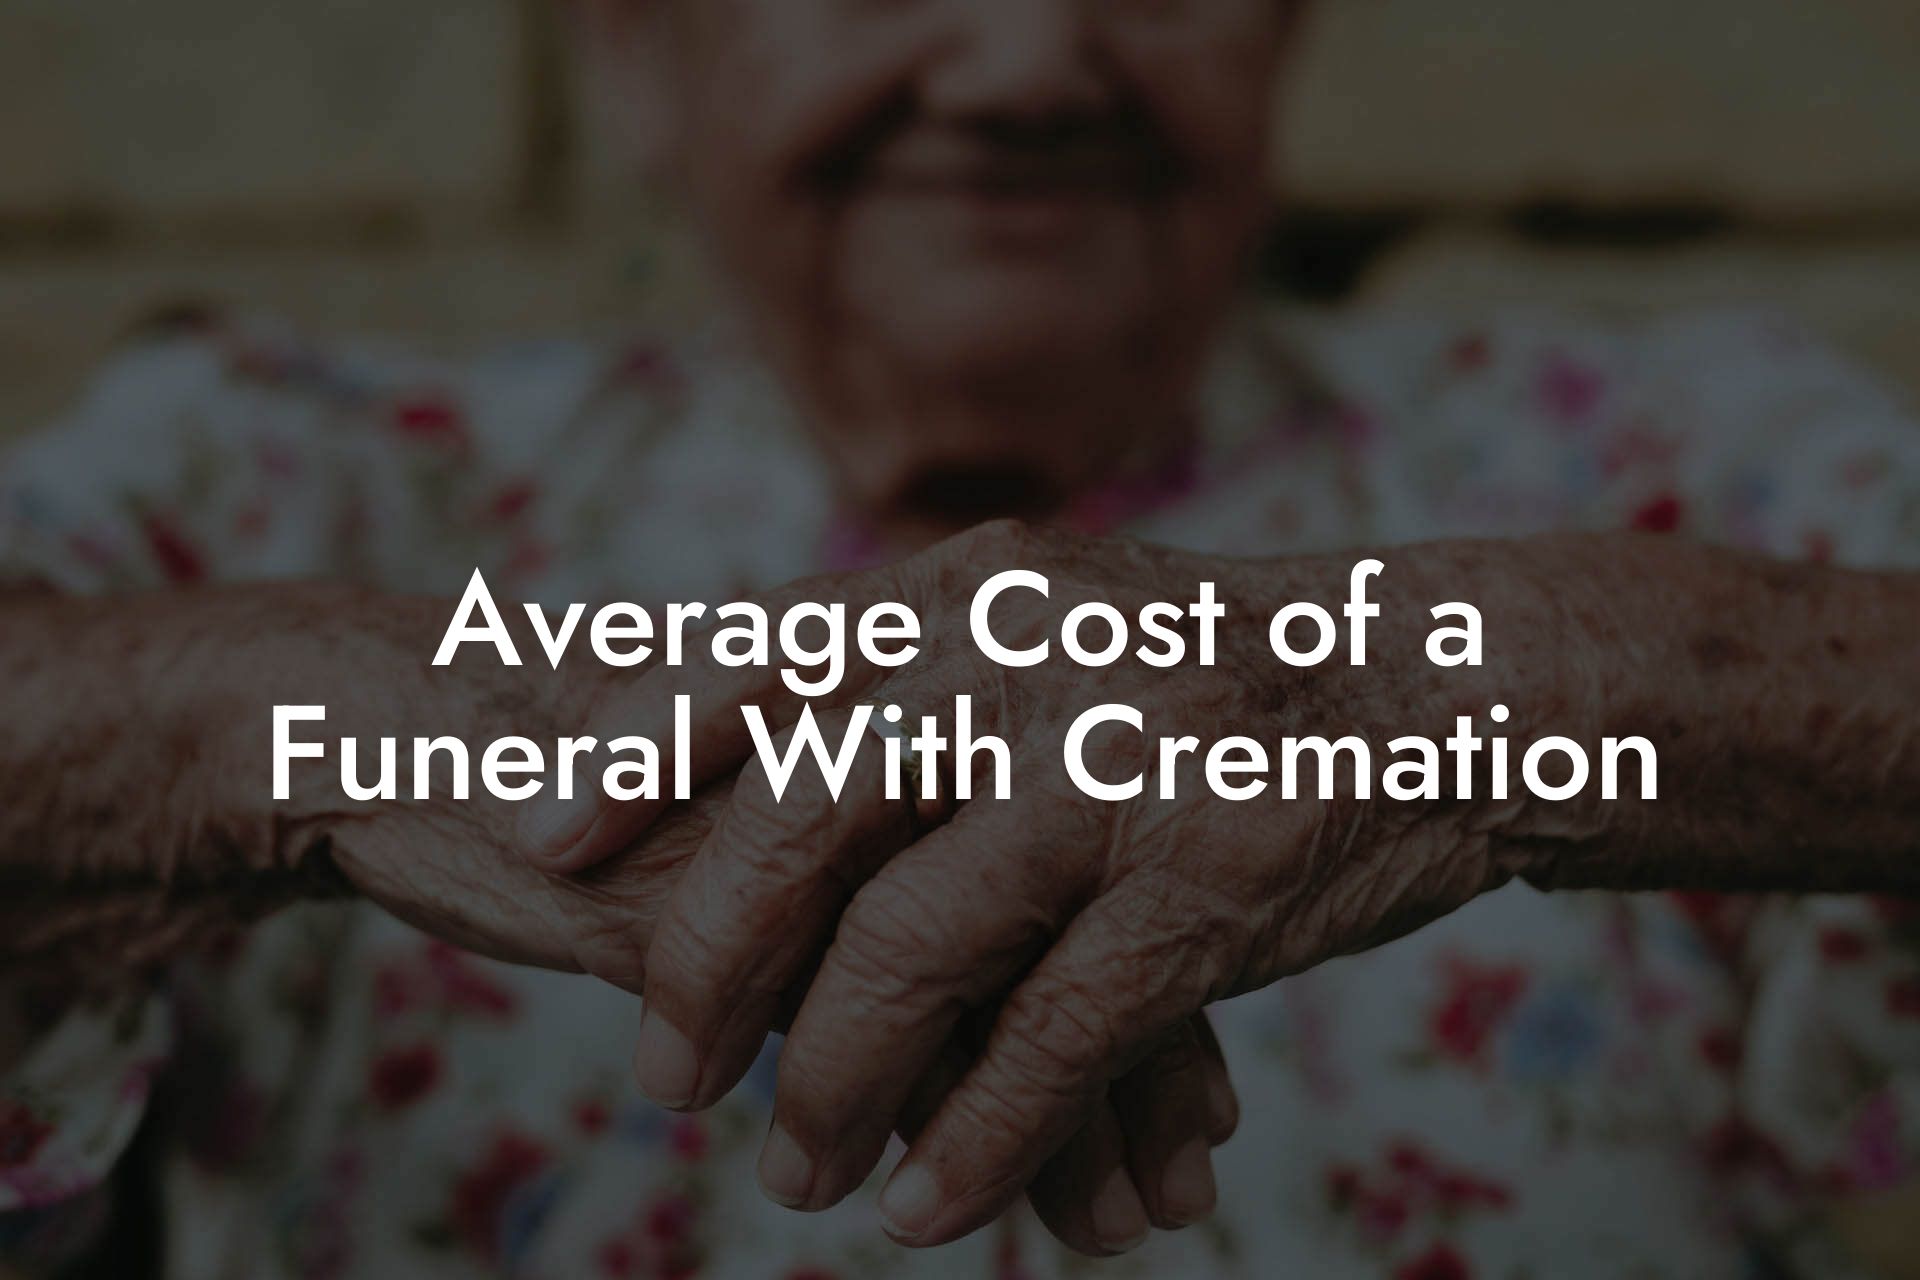 Average Cost of a Funeral With Cremation